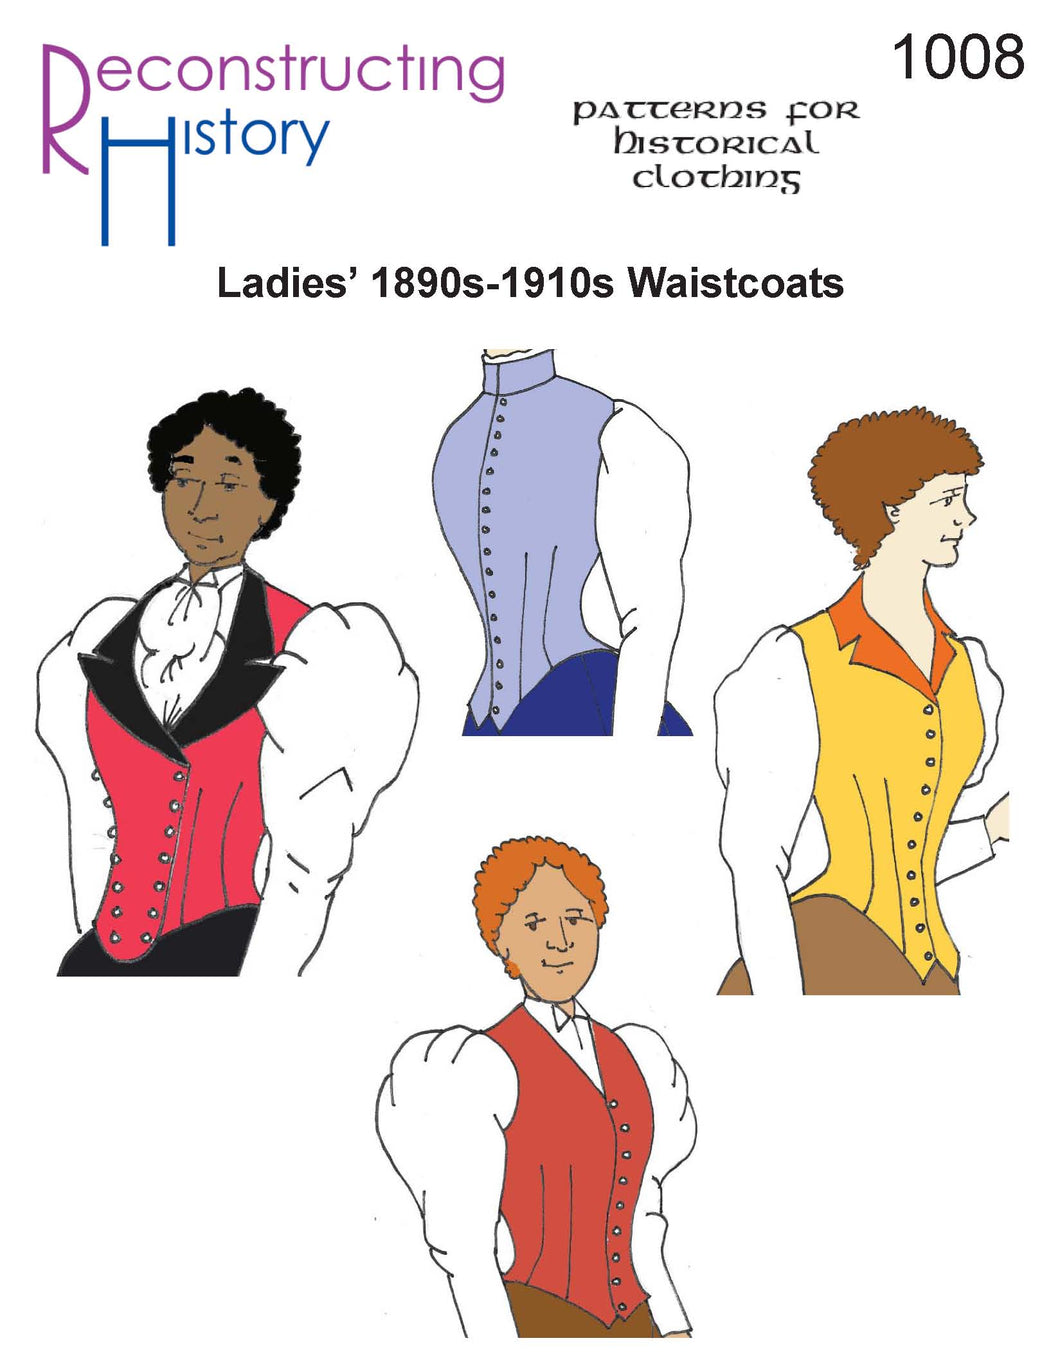 Front cover for RH1008 - a Victorian (1880s) and Edwardian (1900s-1910s) ladies waistcoat or bodice sewing pattern